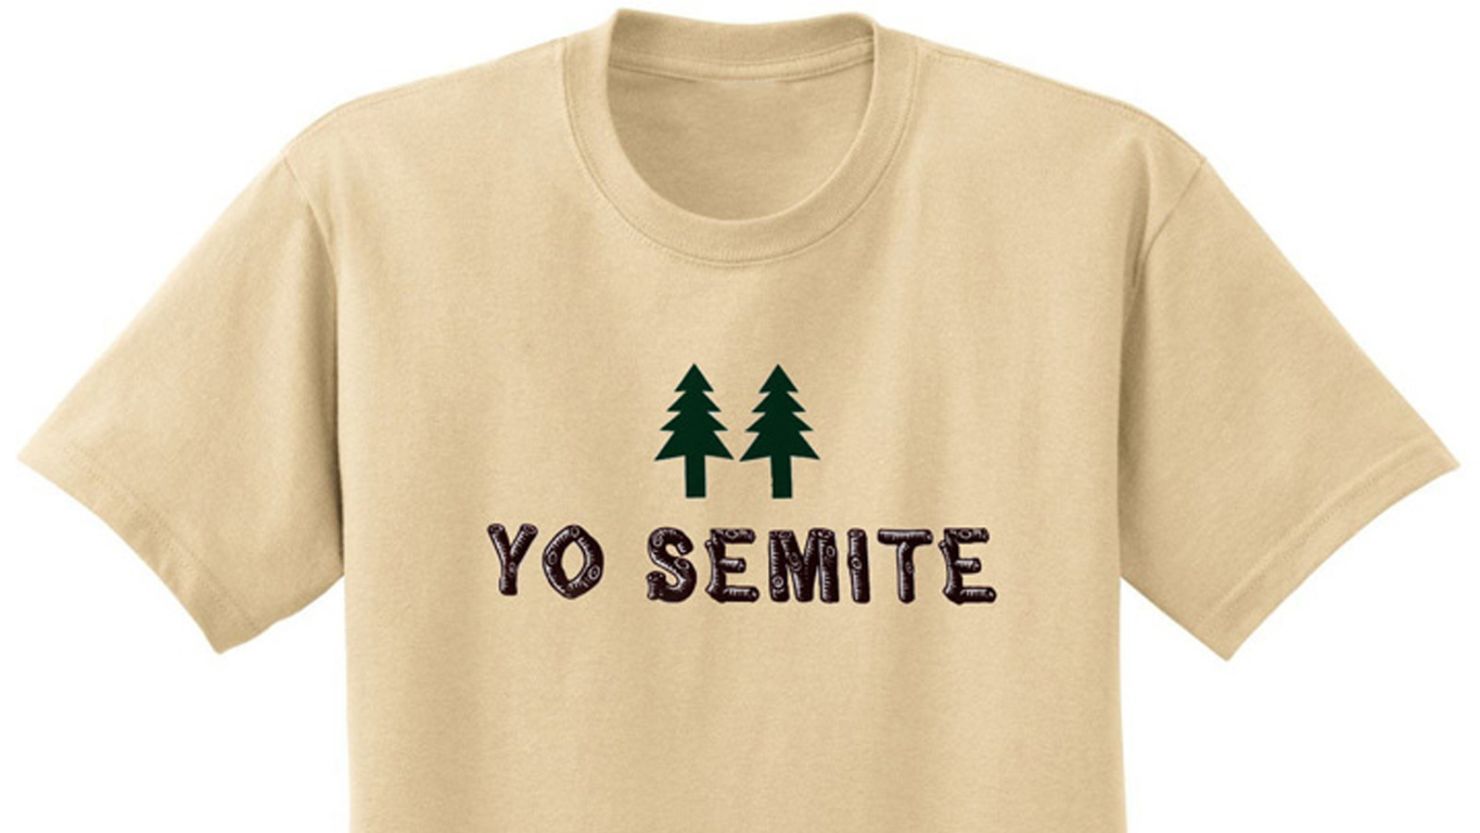 Sales of the National Museum of American Jewish History's "Yo Semite" t-shirt, created a decade ago by artist Sarah Lefton, always rise when Yosemite is in the news.